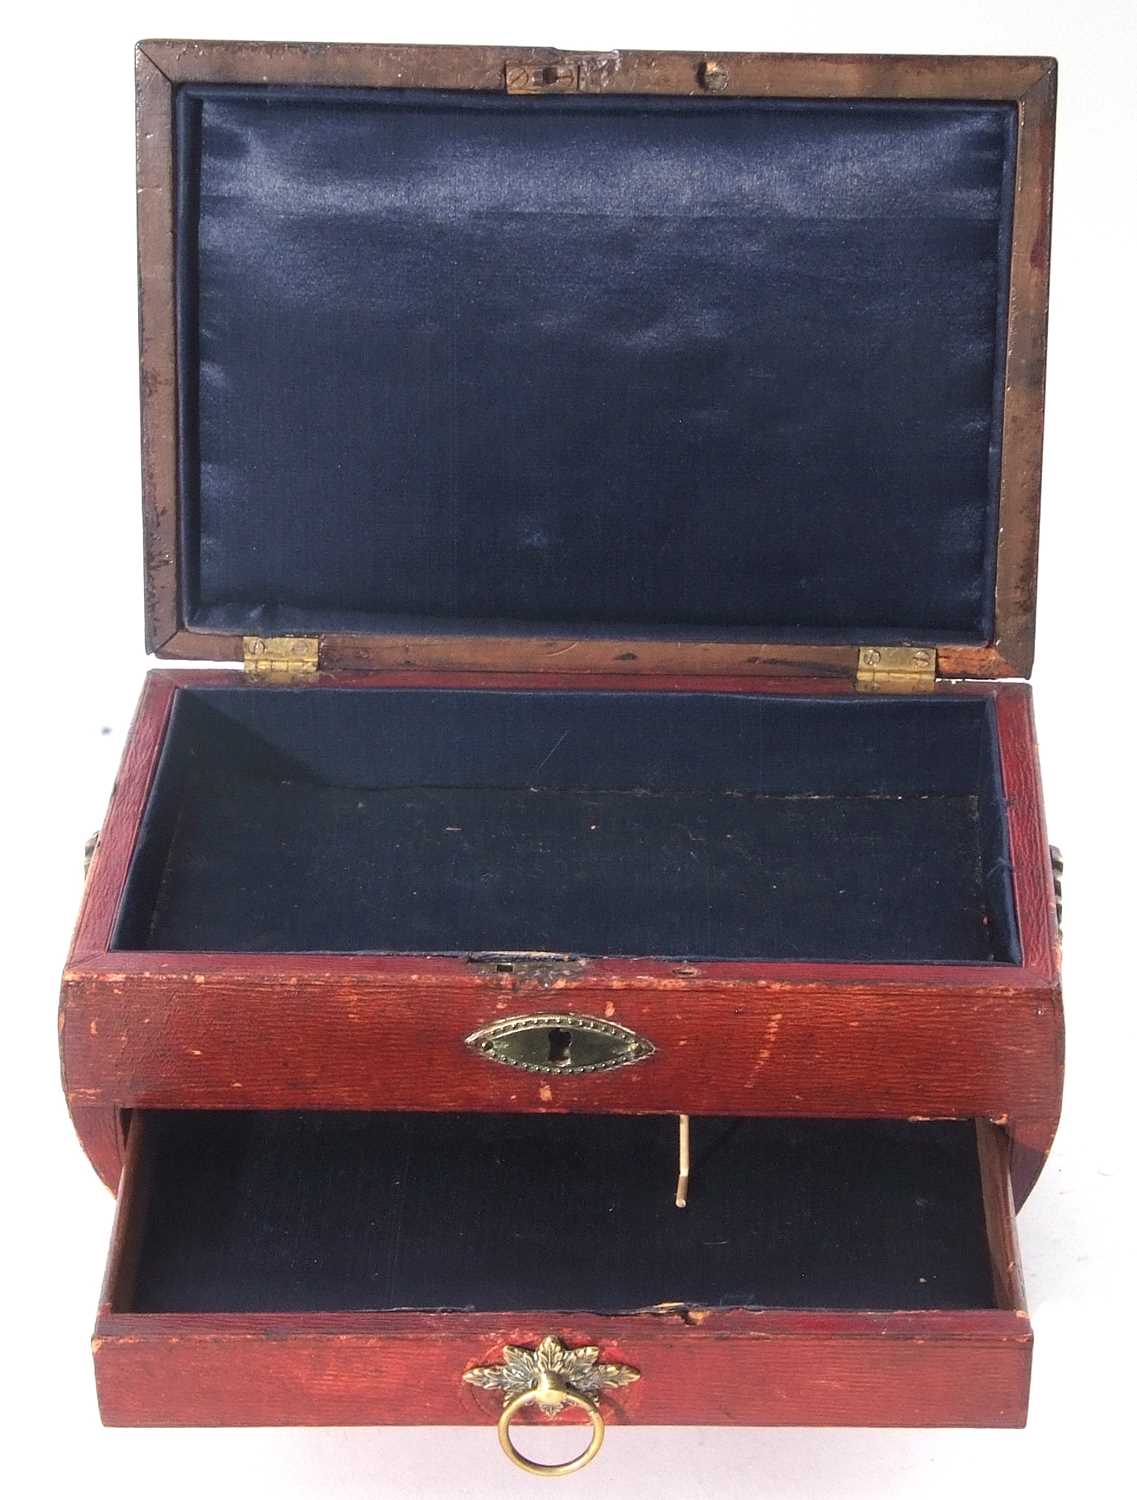 Regency red leather and brass embossed jewel box, hinged lid with silk lined interior, single drawer - Image 6 of 11